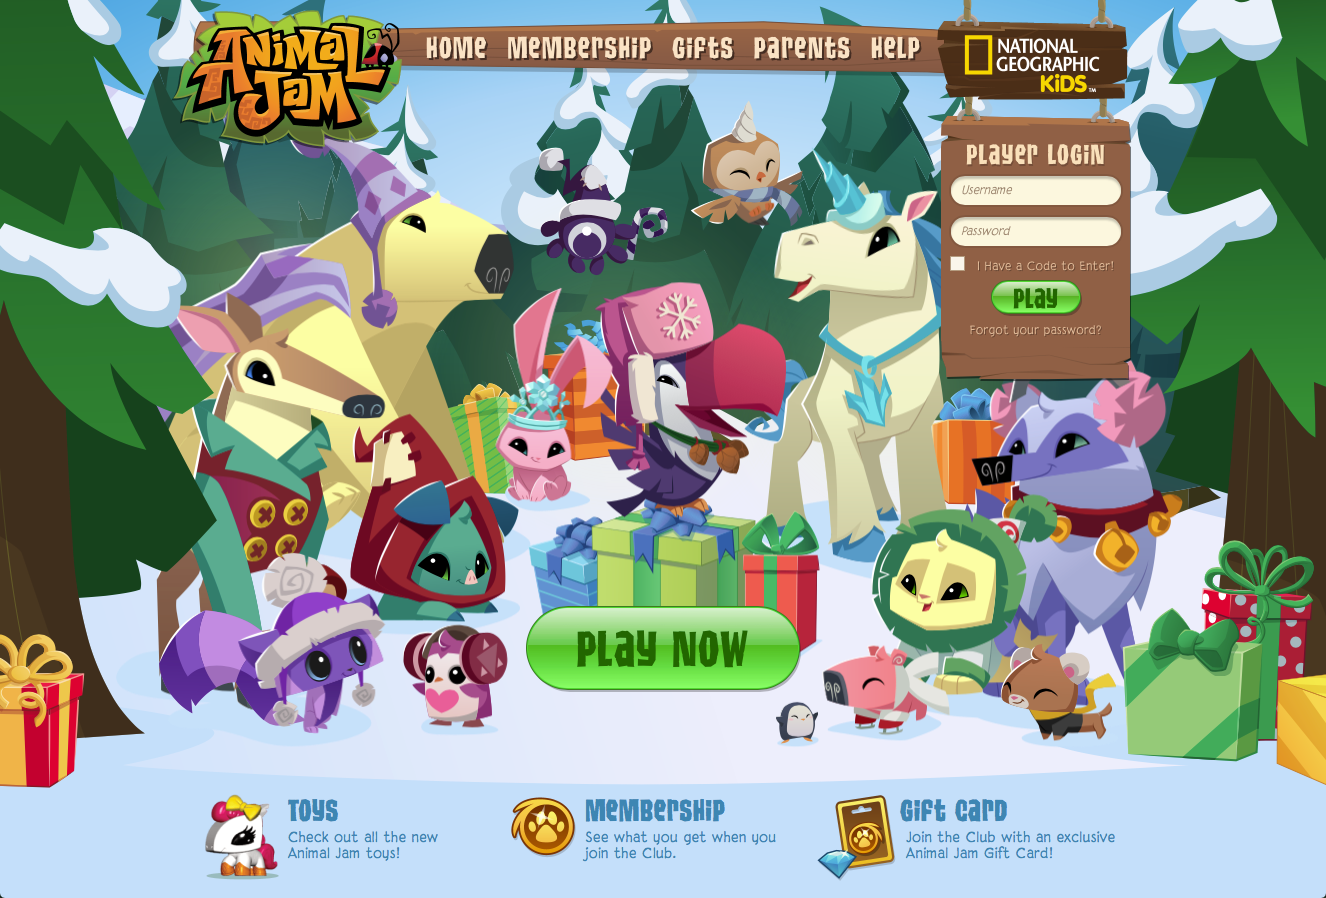 Animal Jam - Classic is certified by the kidSAFE Seal Program